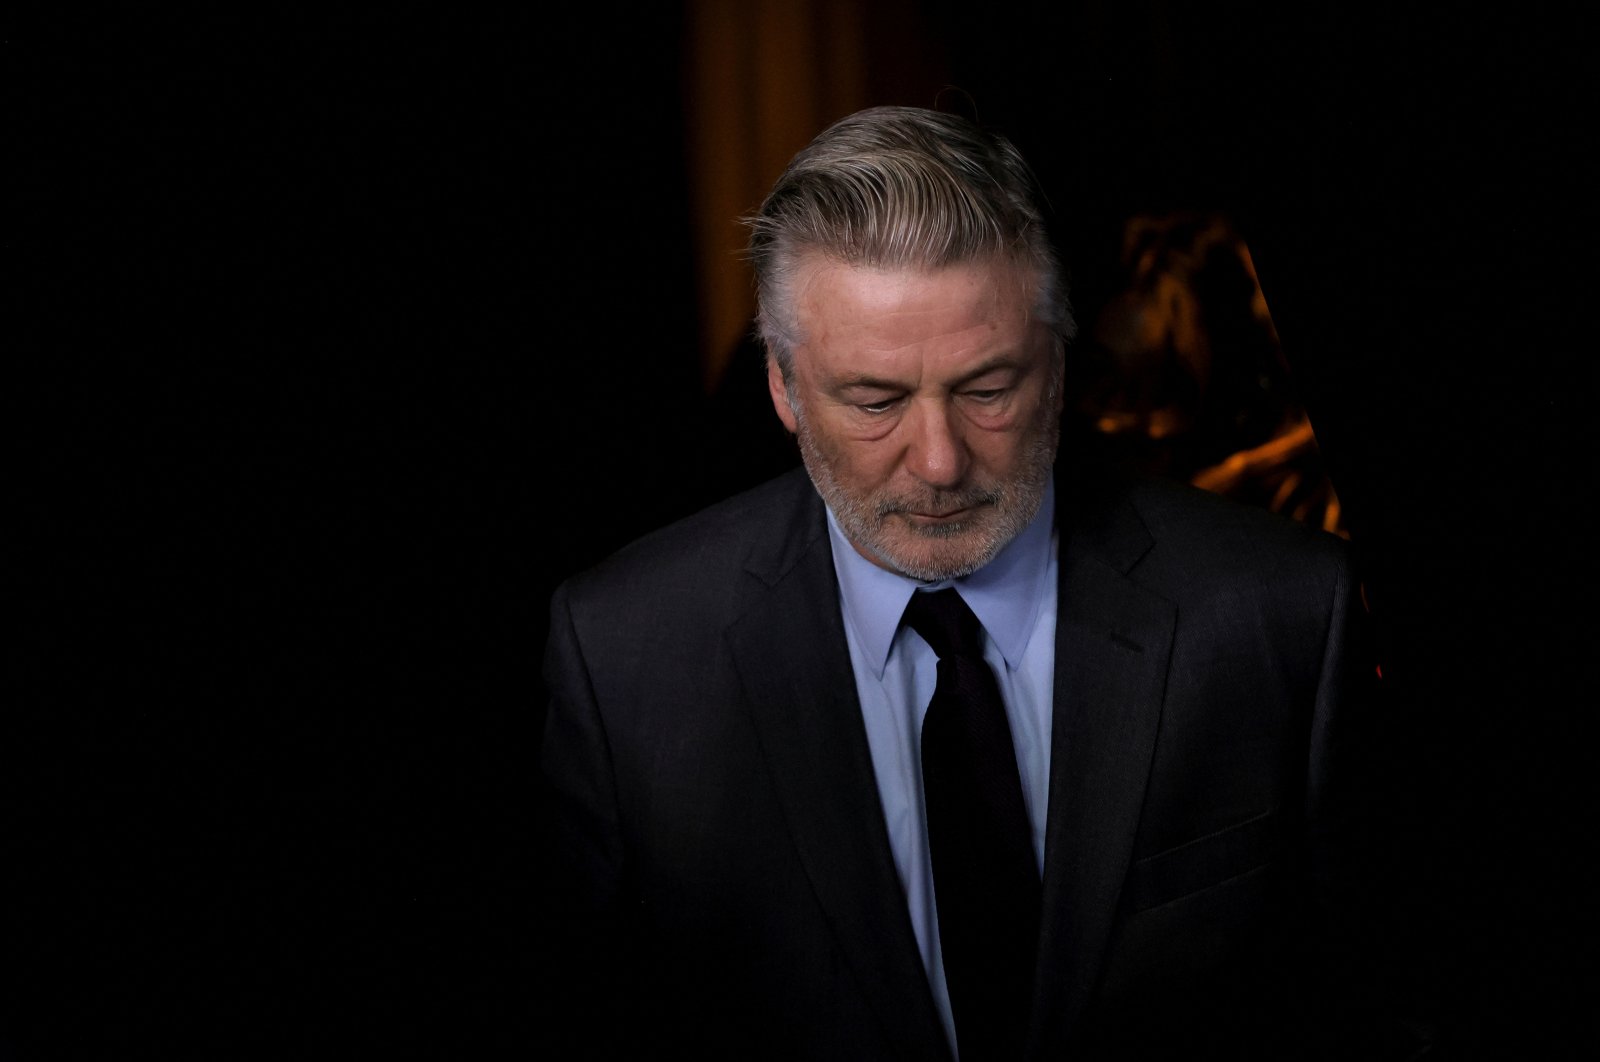 Alec Baldwin attends the 2022 Robert F. Kennedy Human Rights Ripple of Hope Award Gala in New York City, U.S., Dec. 6, 2022. (Reuters Photo)